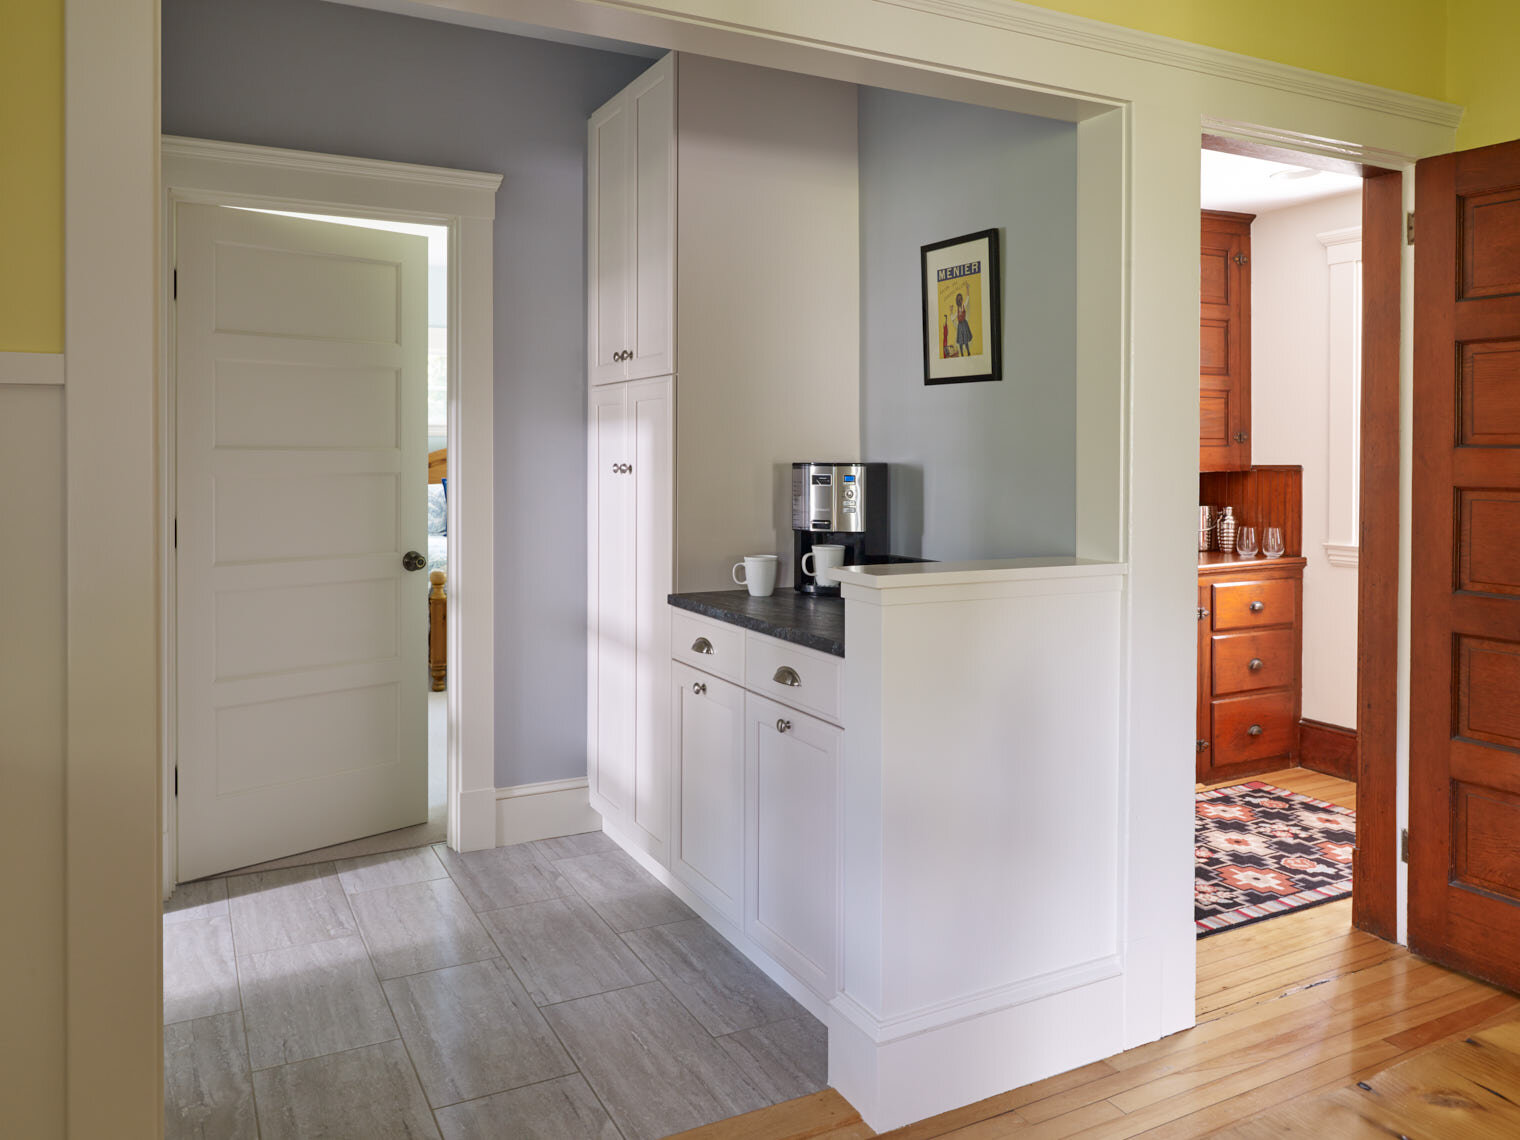  SHINGLE STYLE UPDATE  Pantry area next to the original butler’s pantry 